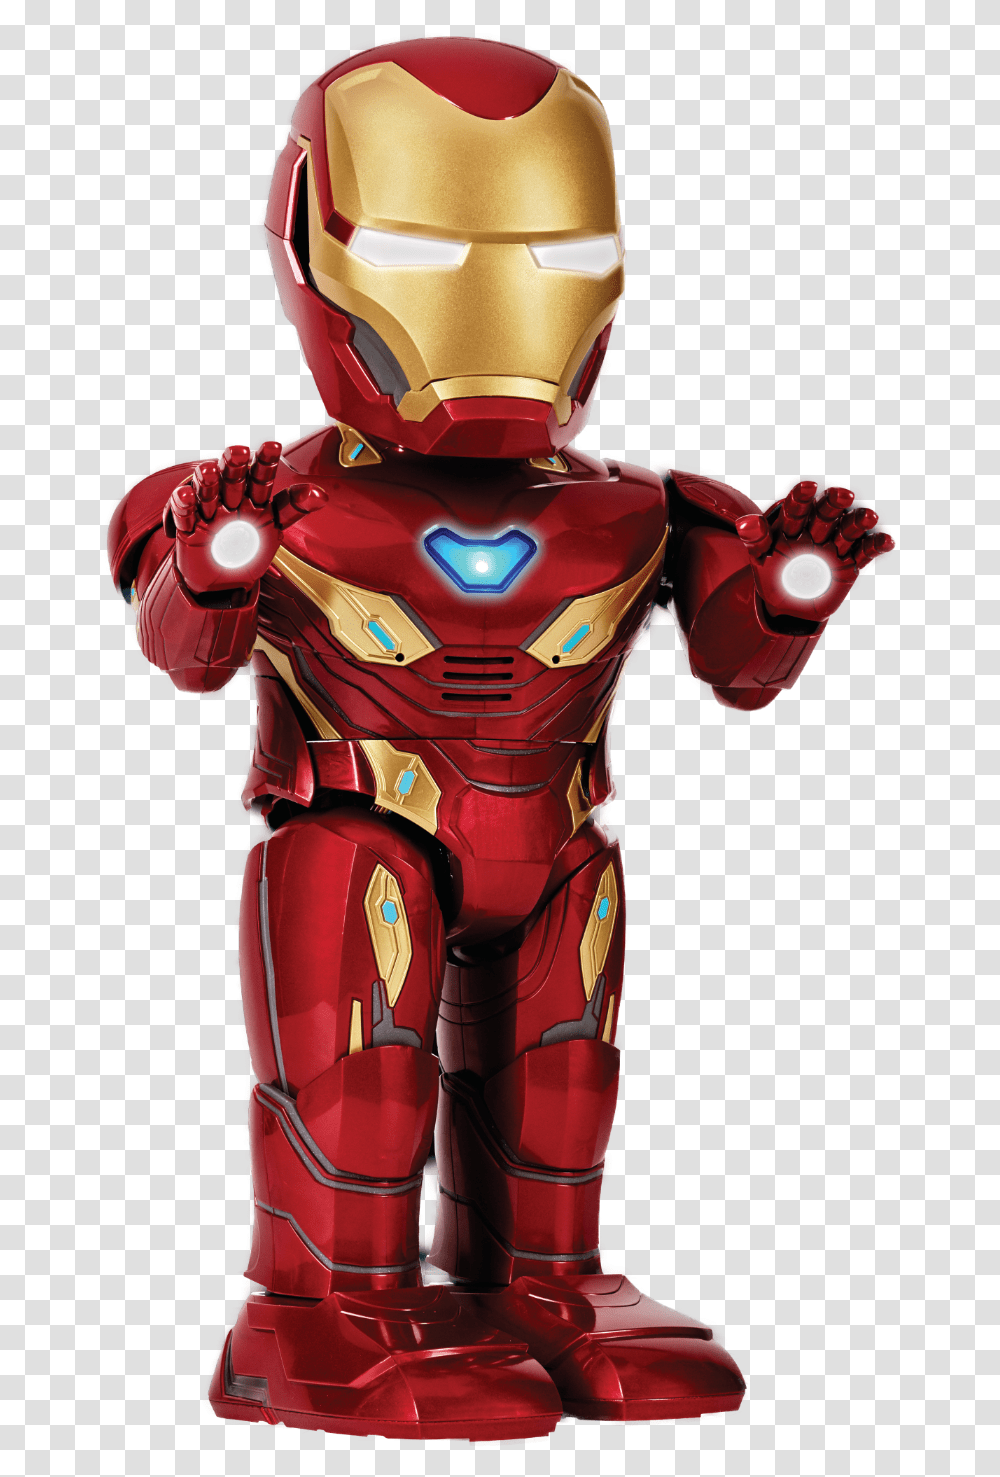 Using The Advanced App To Record A Video Of Yourself Ubtech Iron Man Mk50 Robot, Toy, Helmet, Apparel Transparent Png